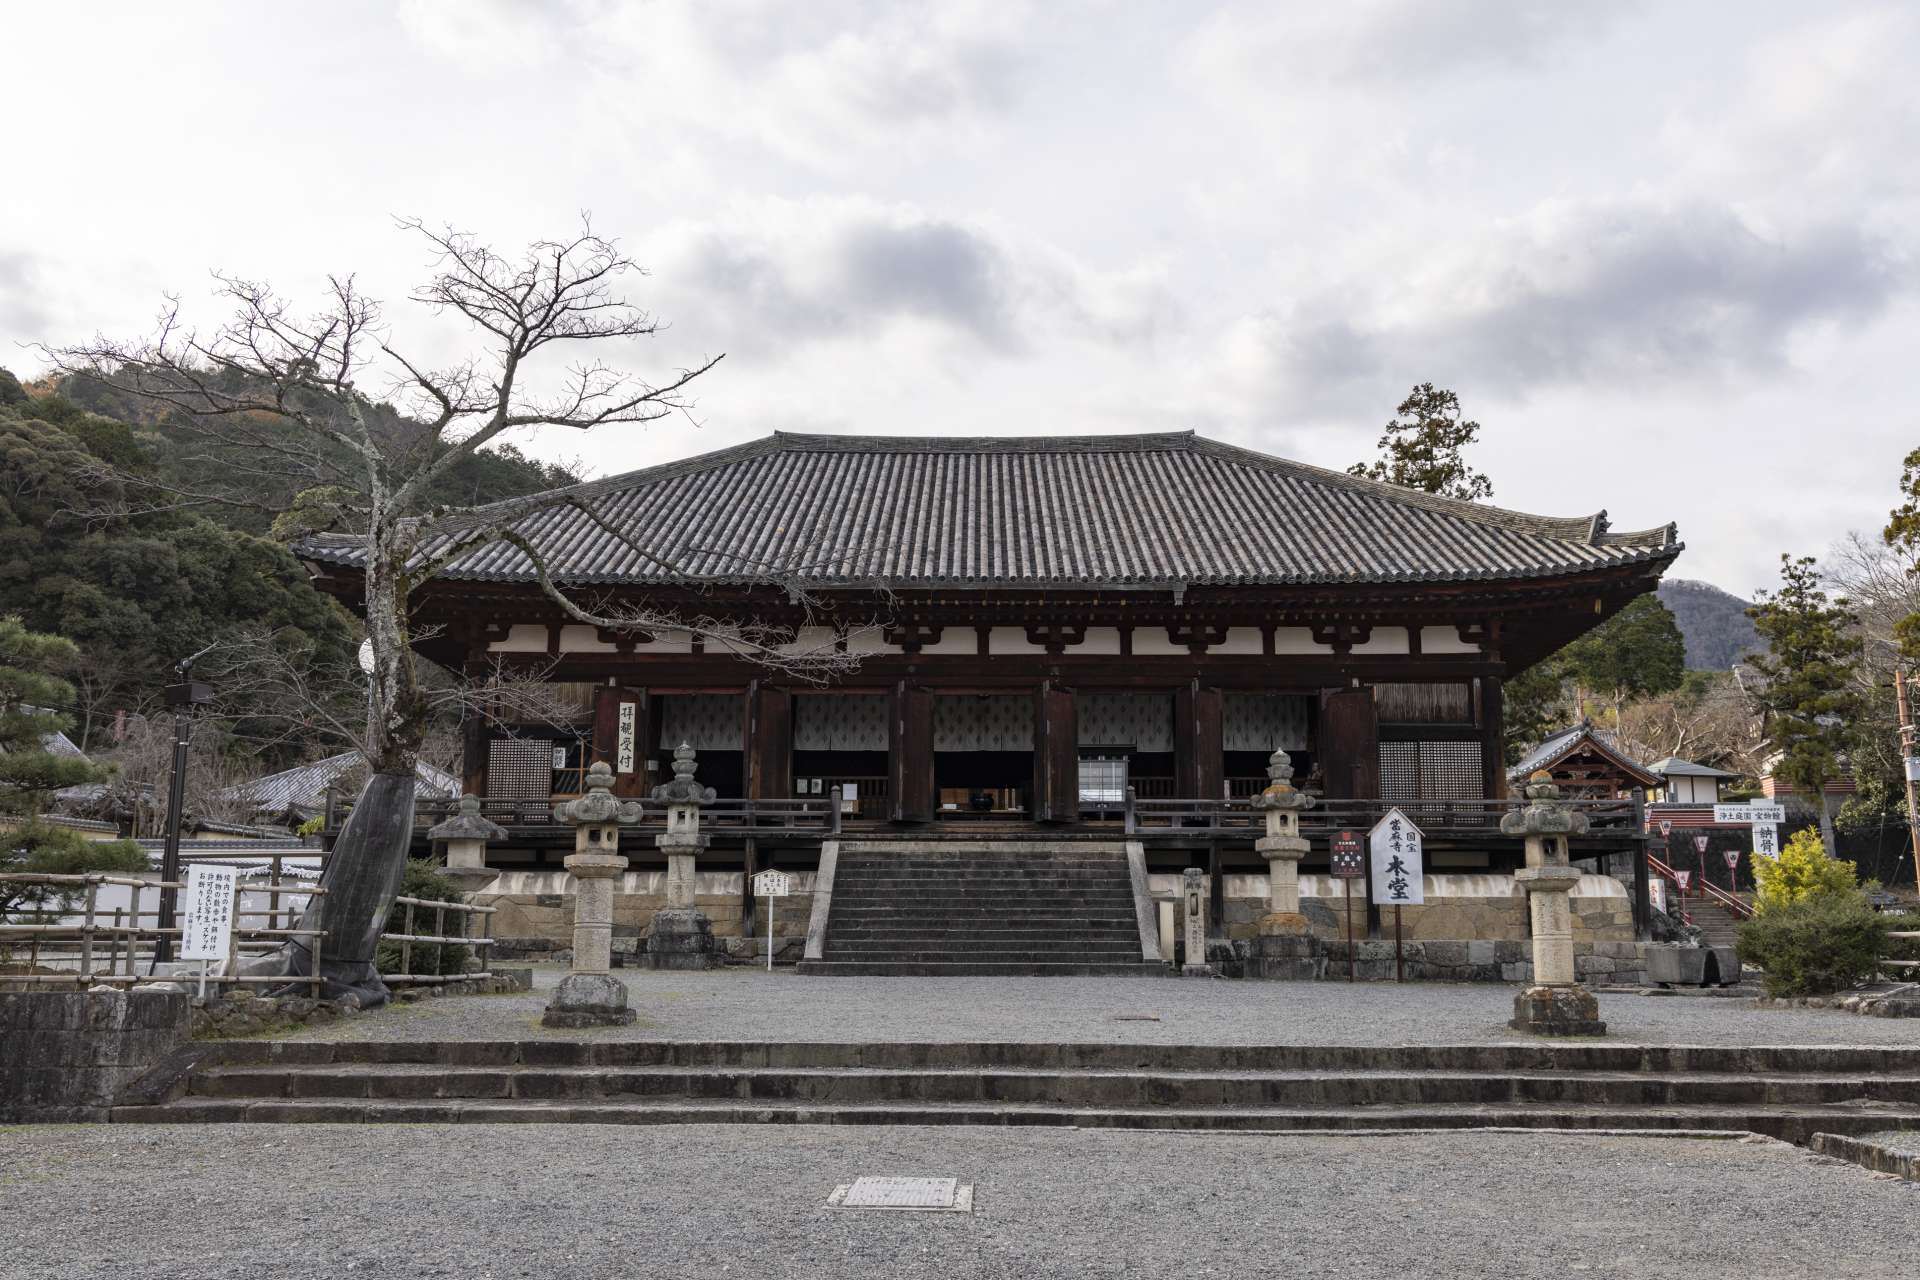 On the grounds of Taima-dera temple. 